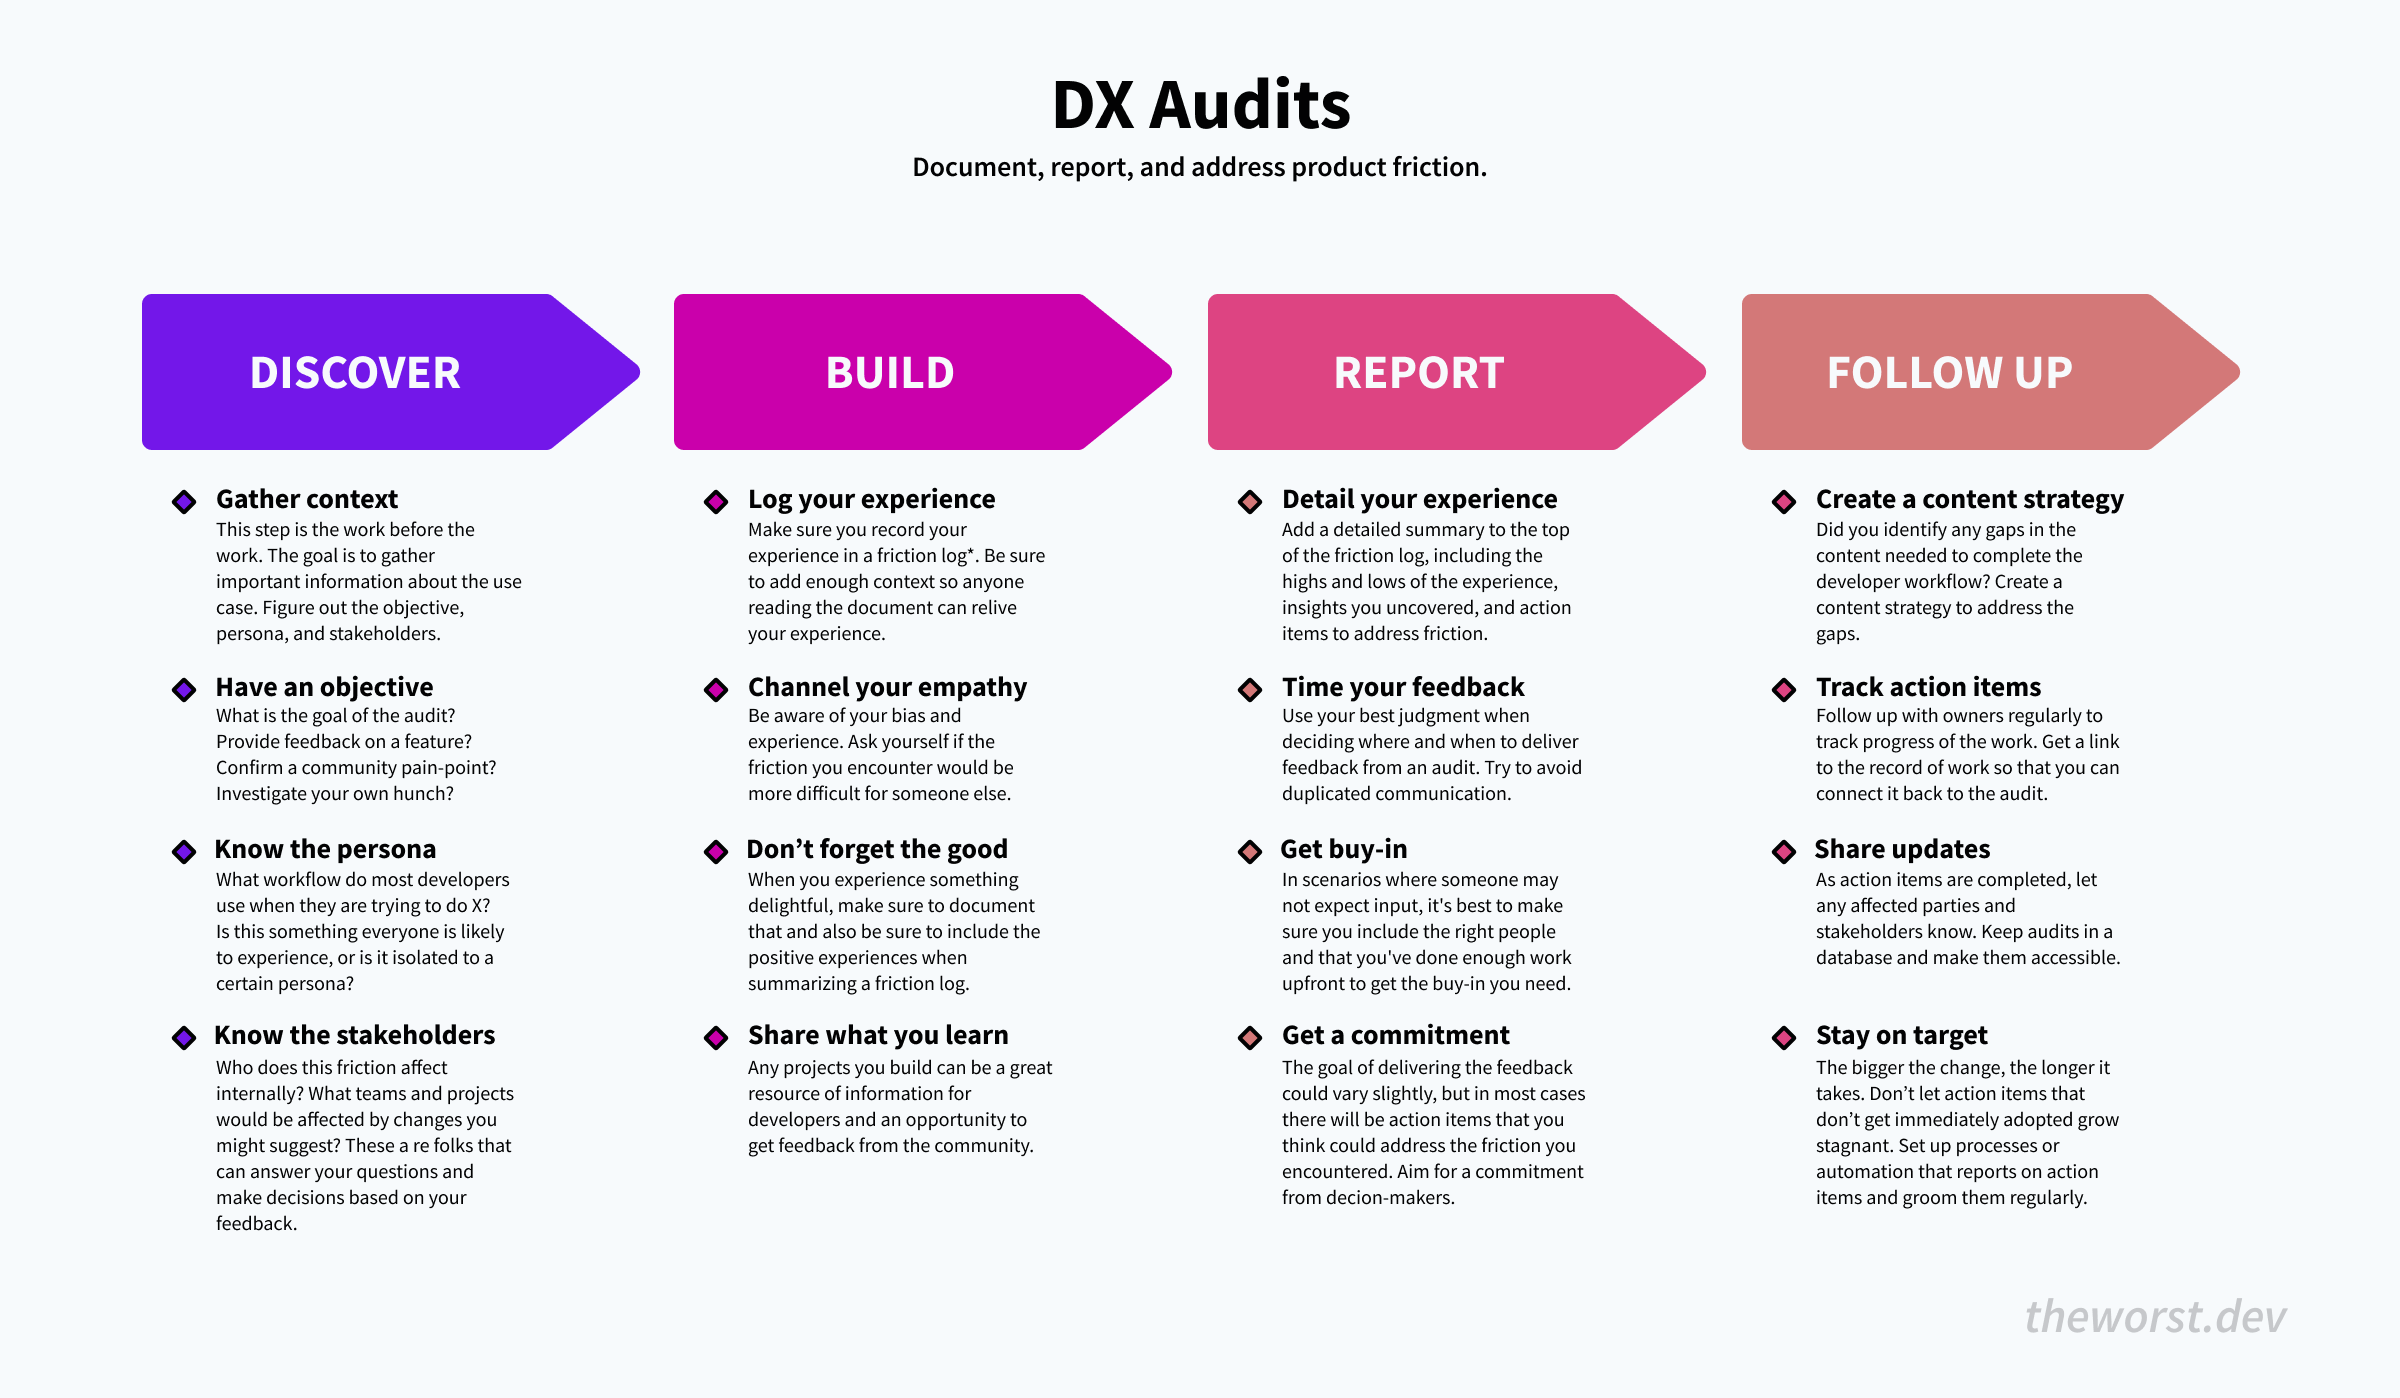 An infographic showing the flow through the four steps of the dx audit framework. Each step has four bullets below it summarizing each step of the framework.